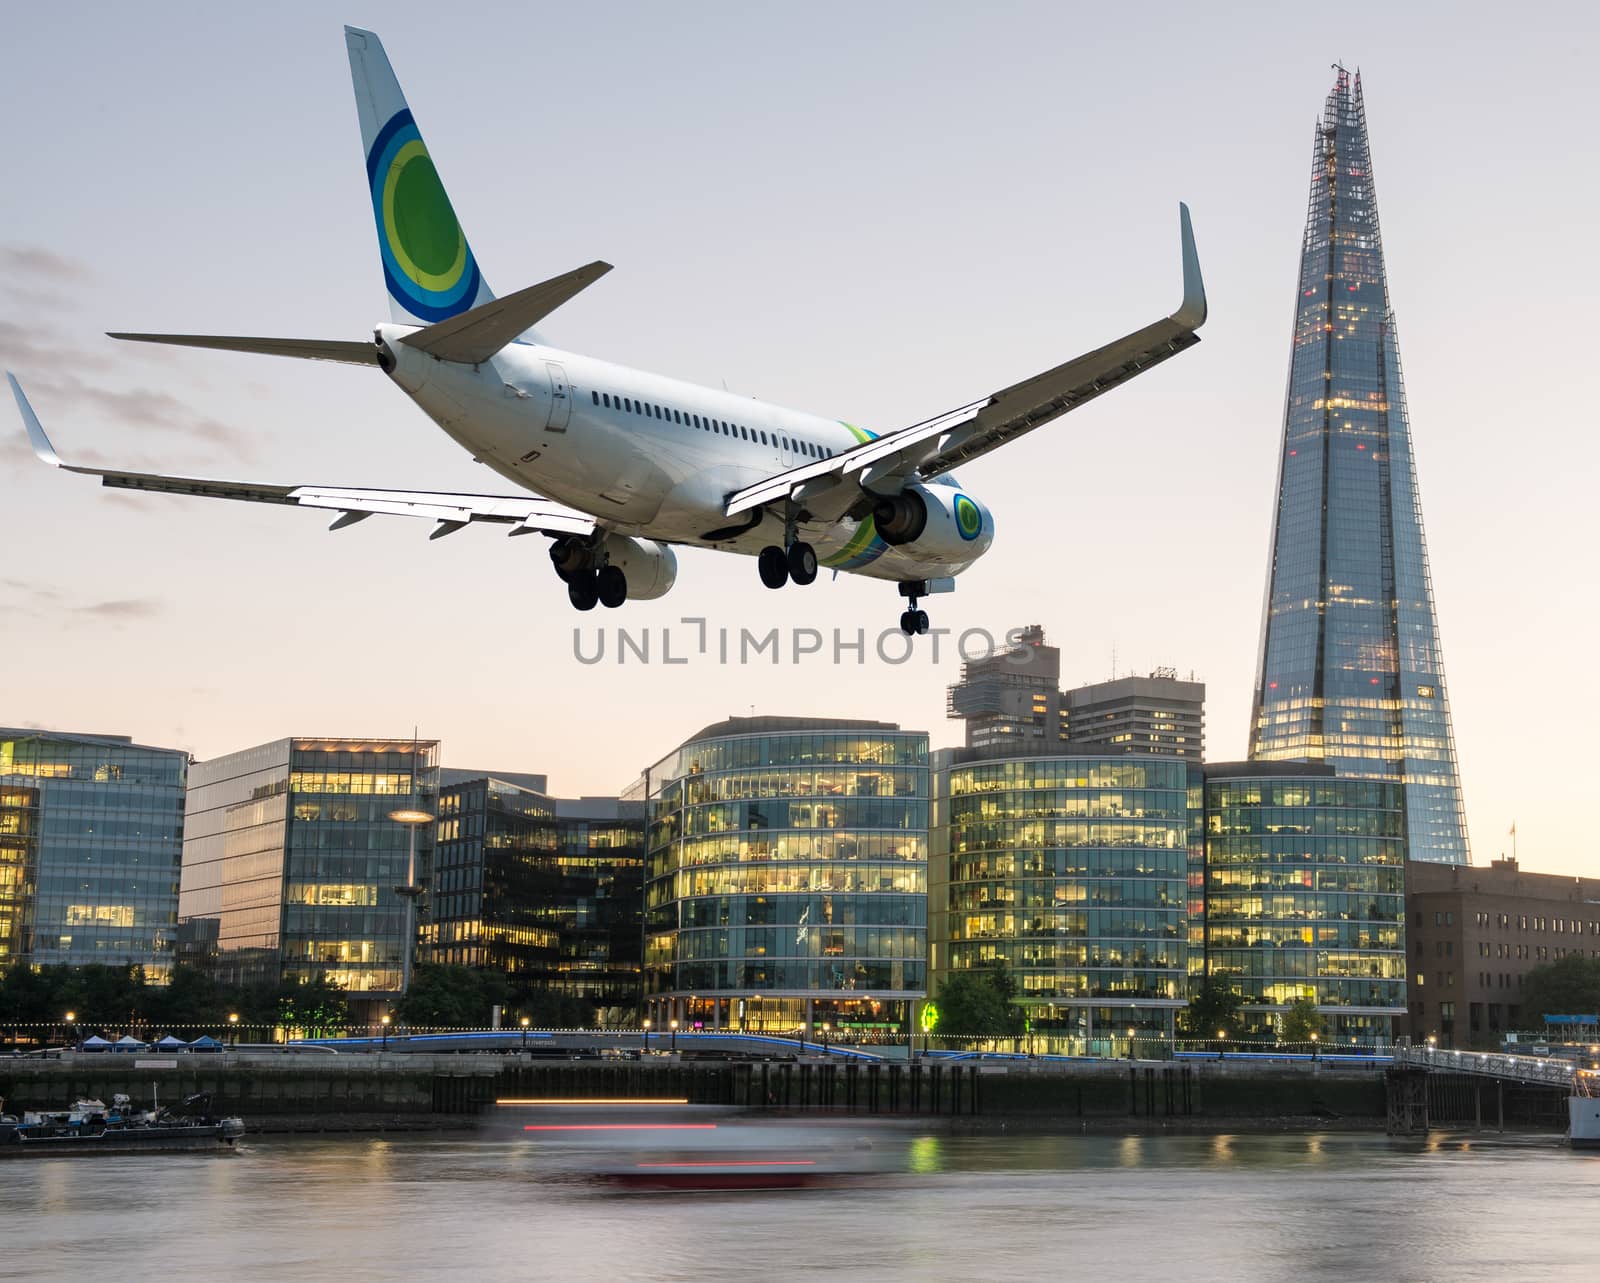 Airplane overflying London - Tourism and vacation concept.